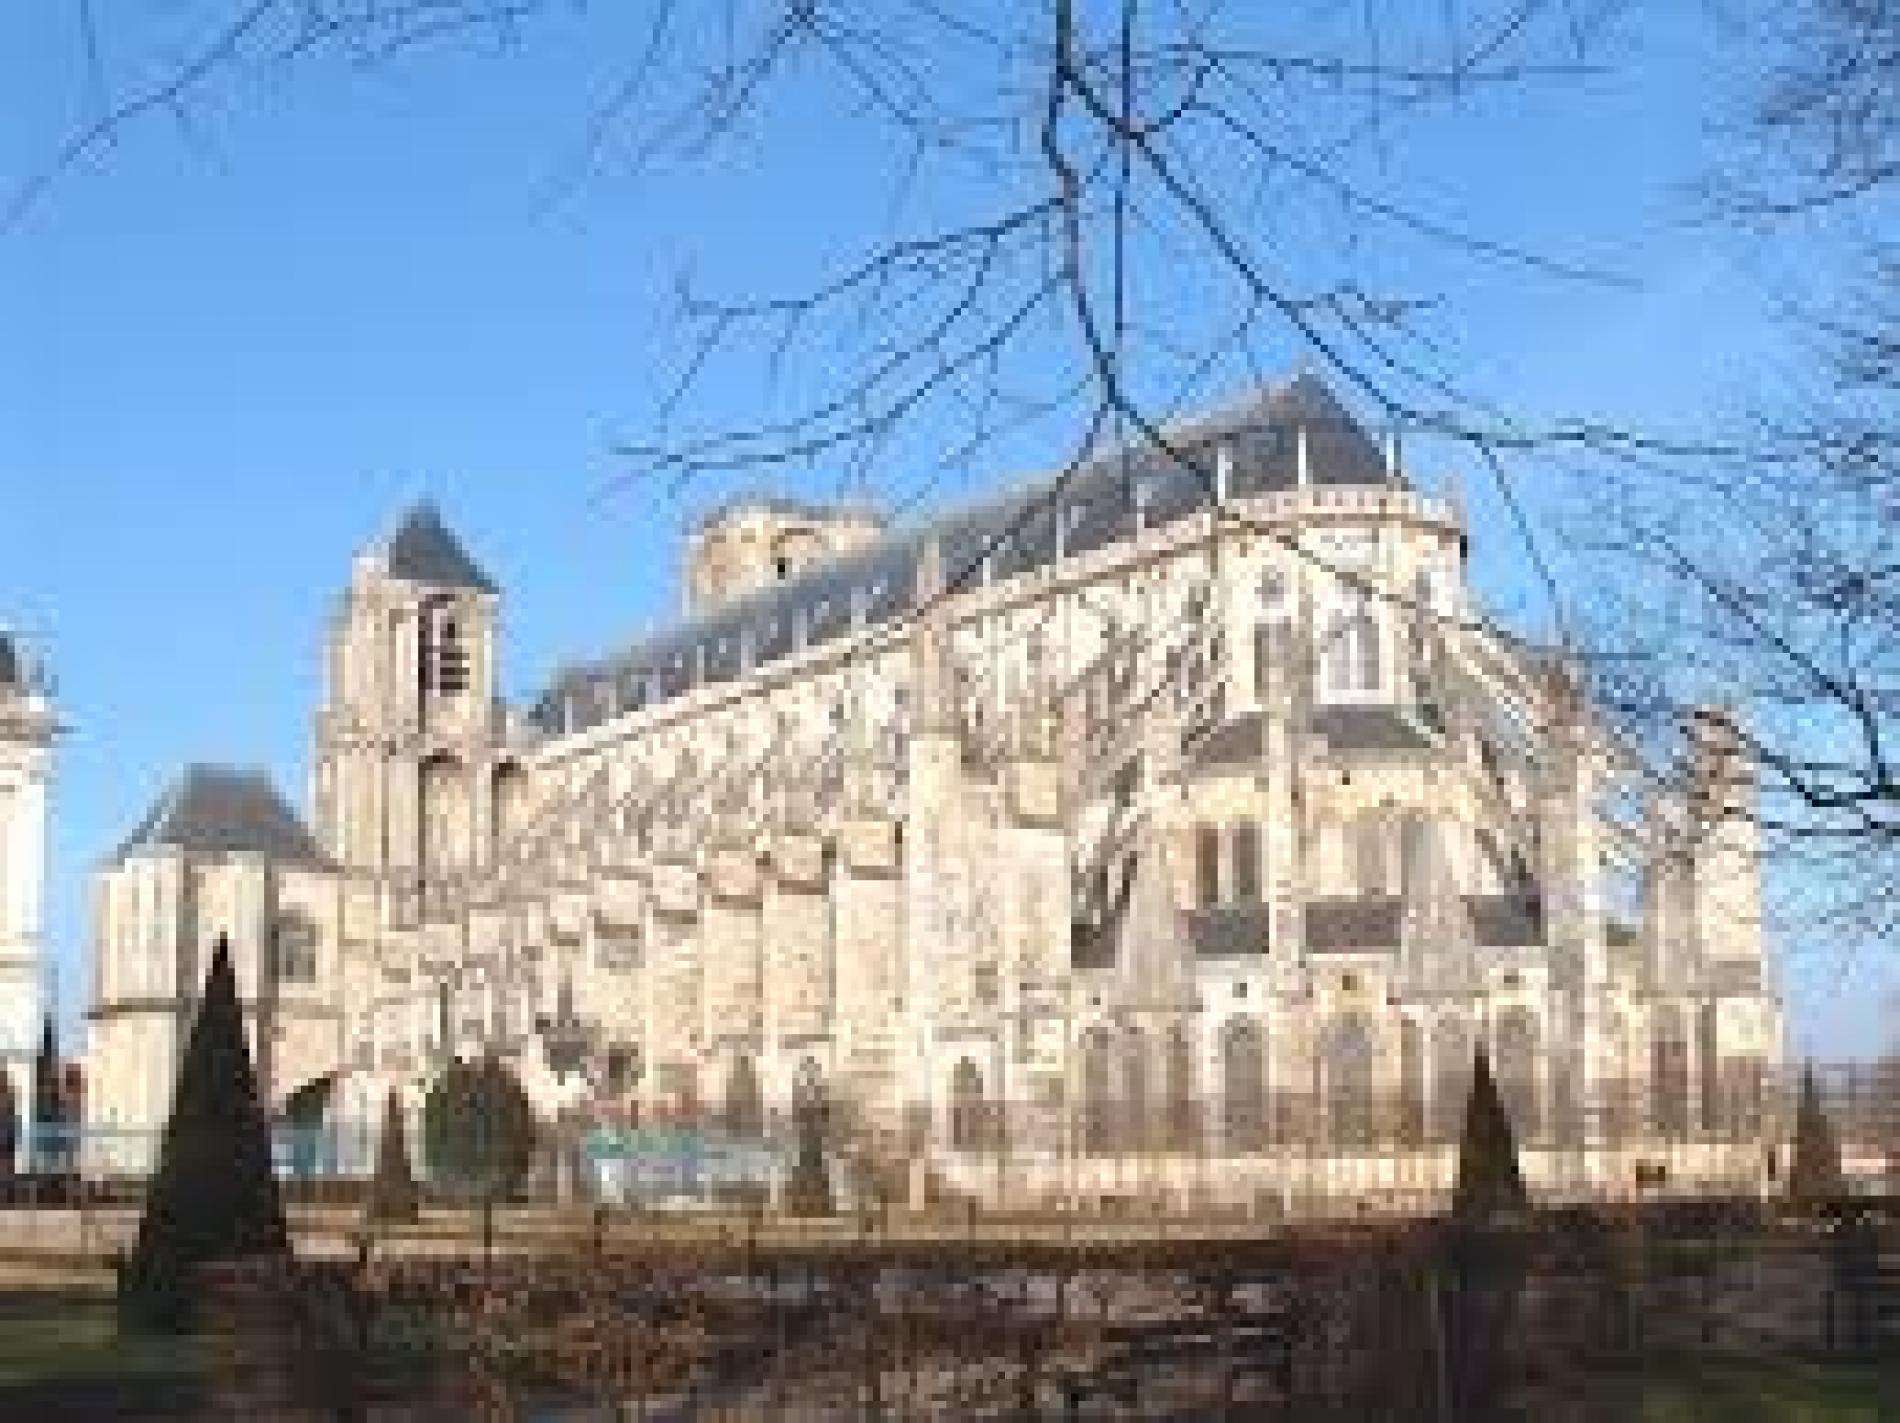 The Saint-Etienne Cathedrale